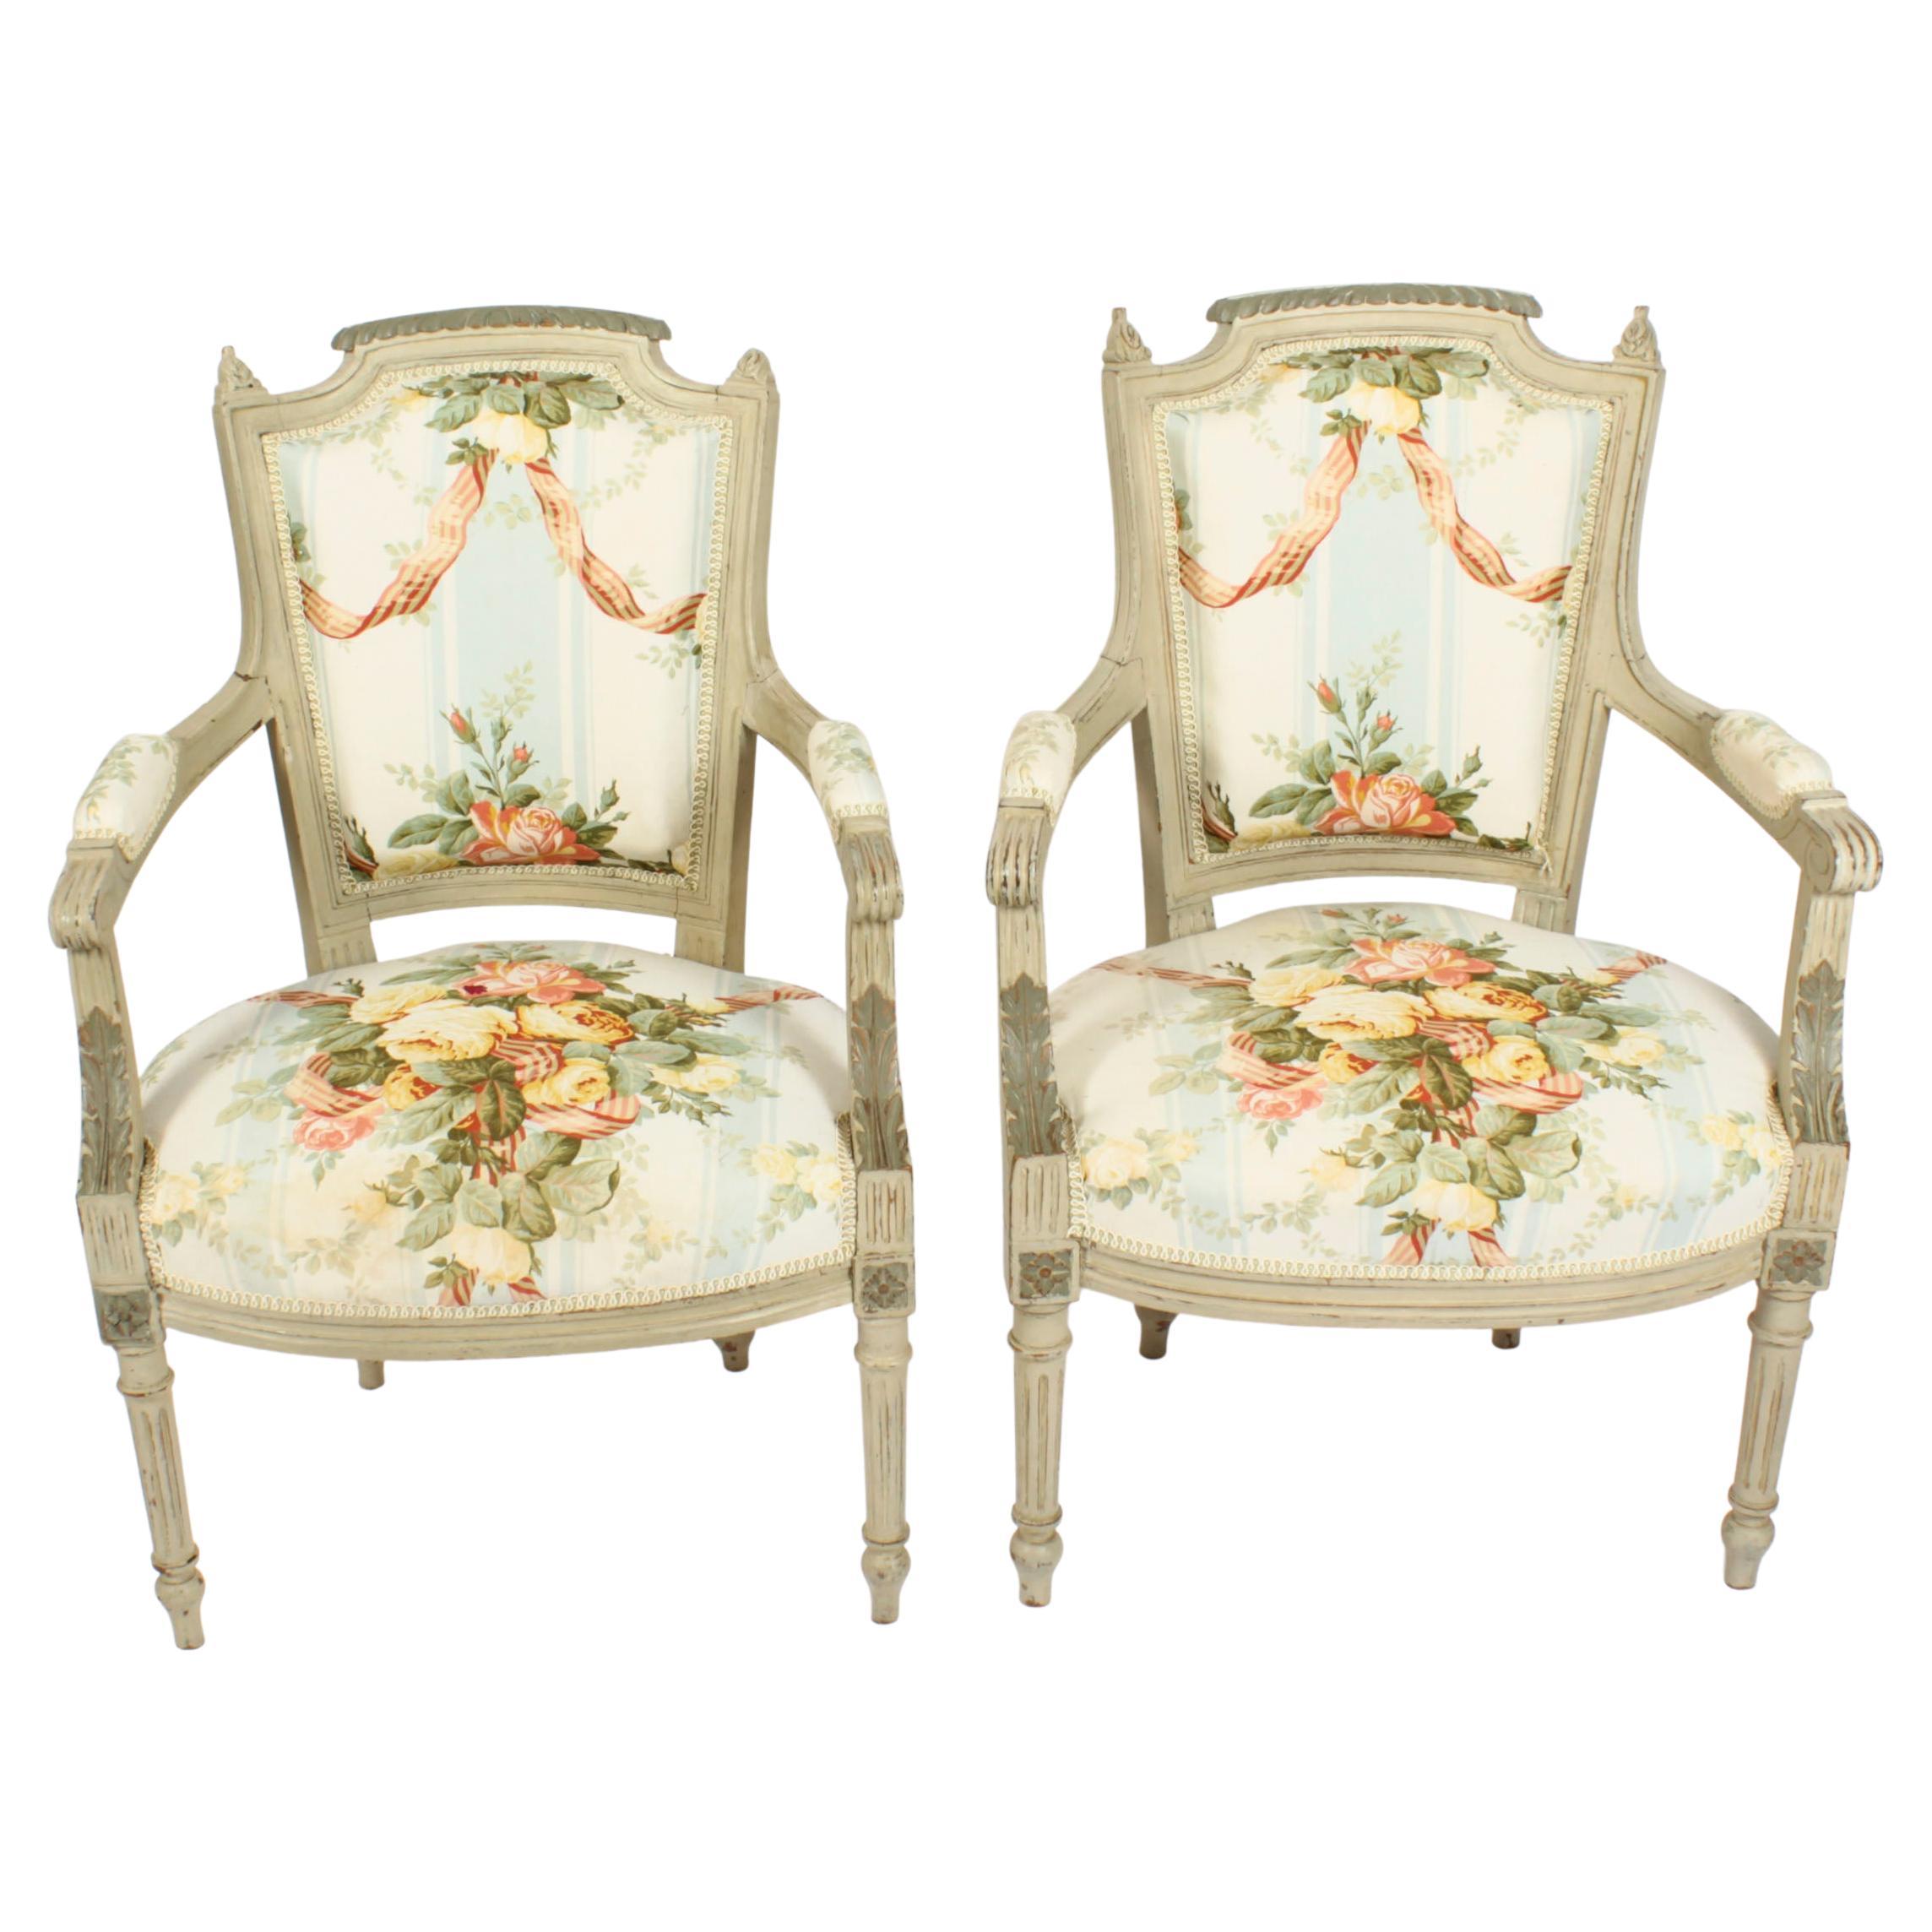 Antique Pair French Louis XVI Revival Painted Fauteuil Armchairs, 19th Century